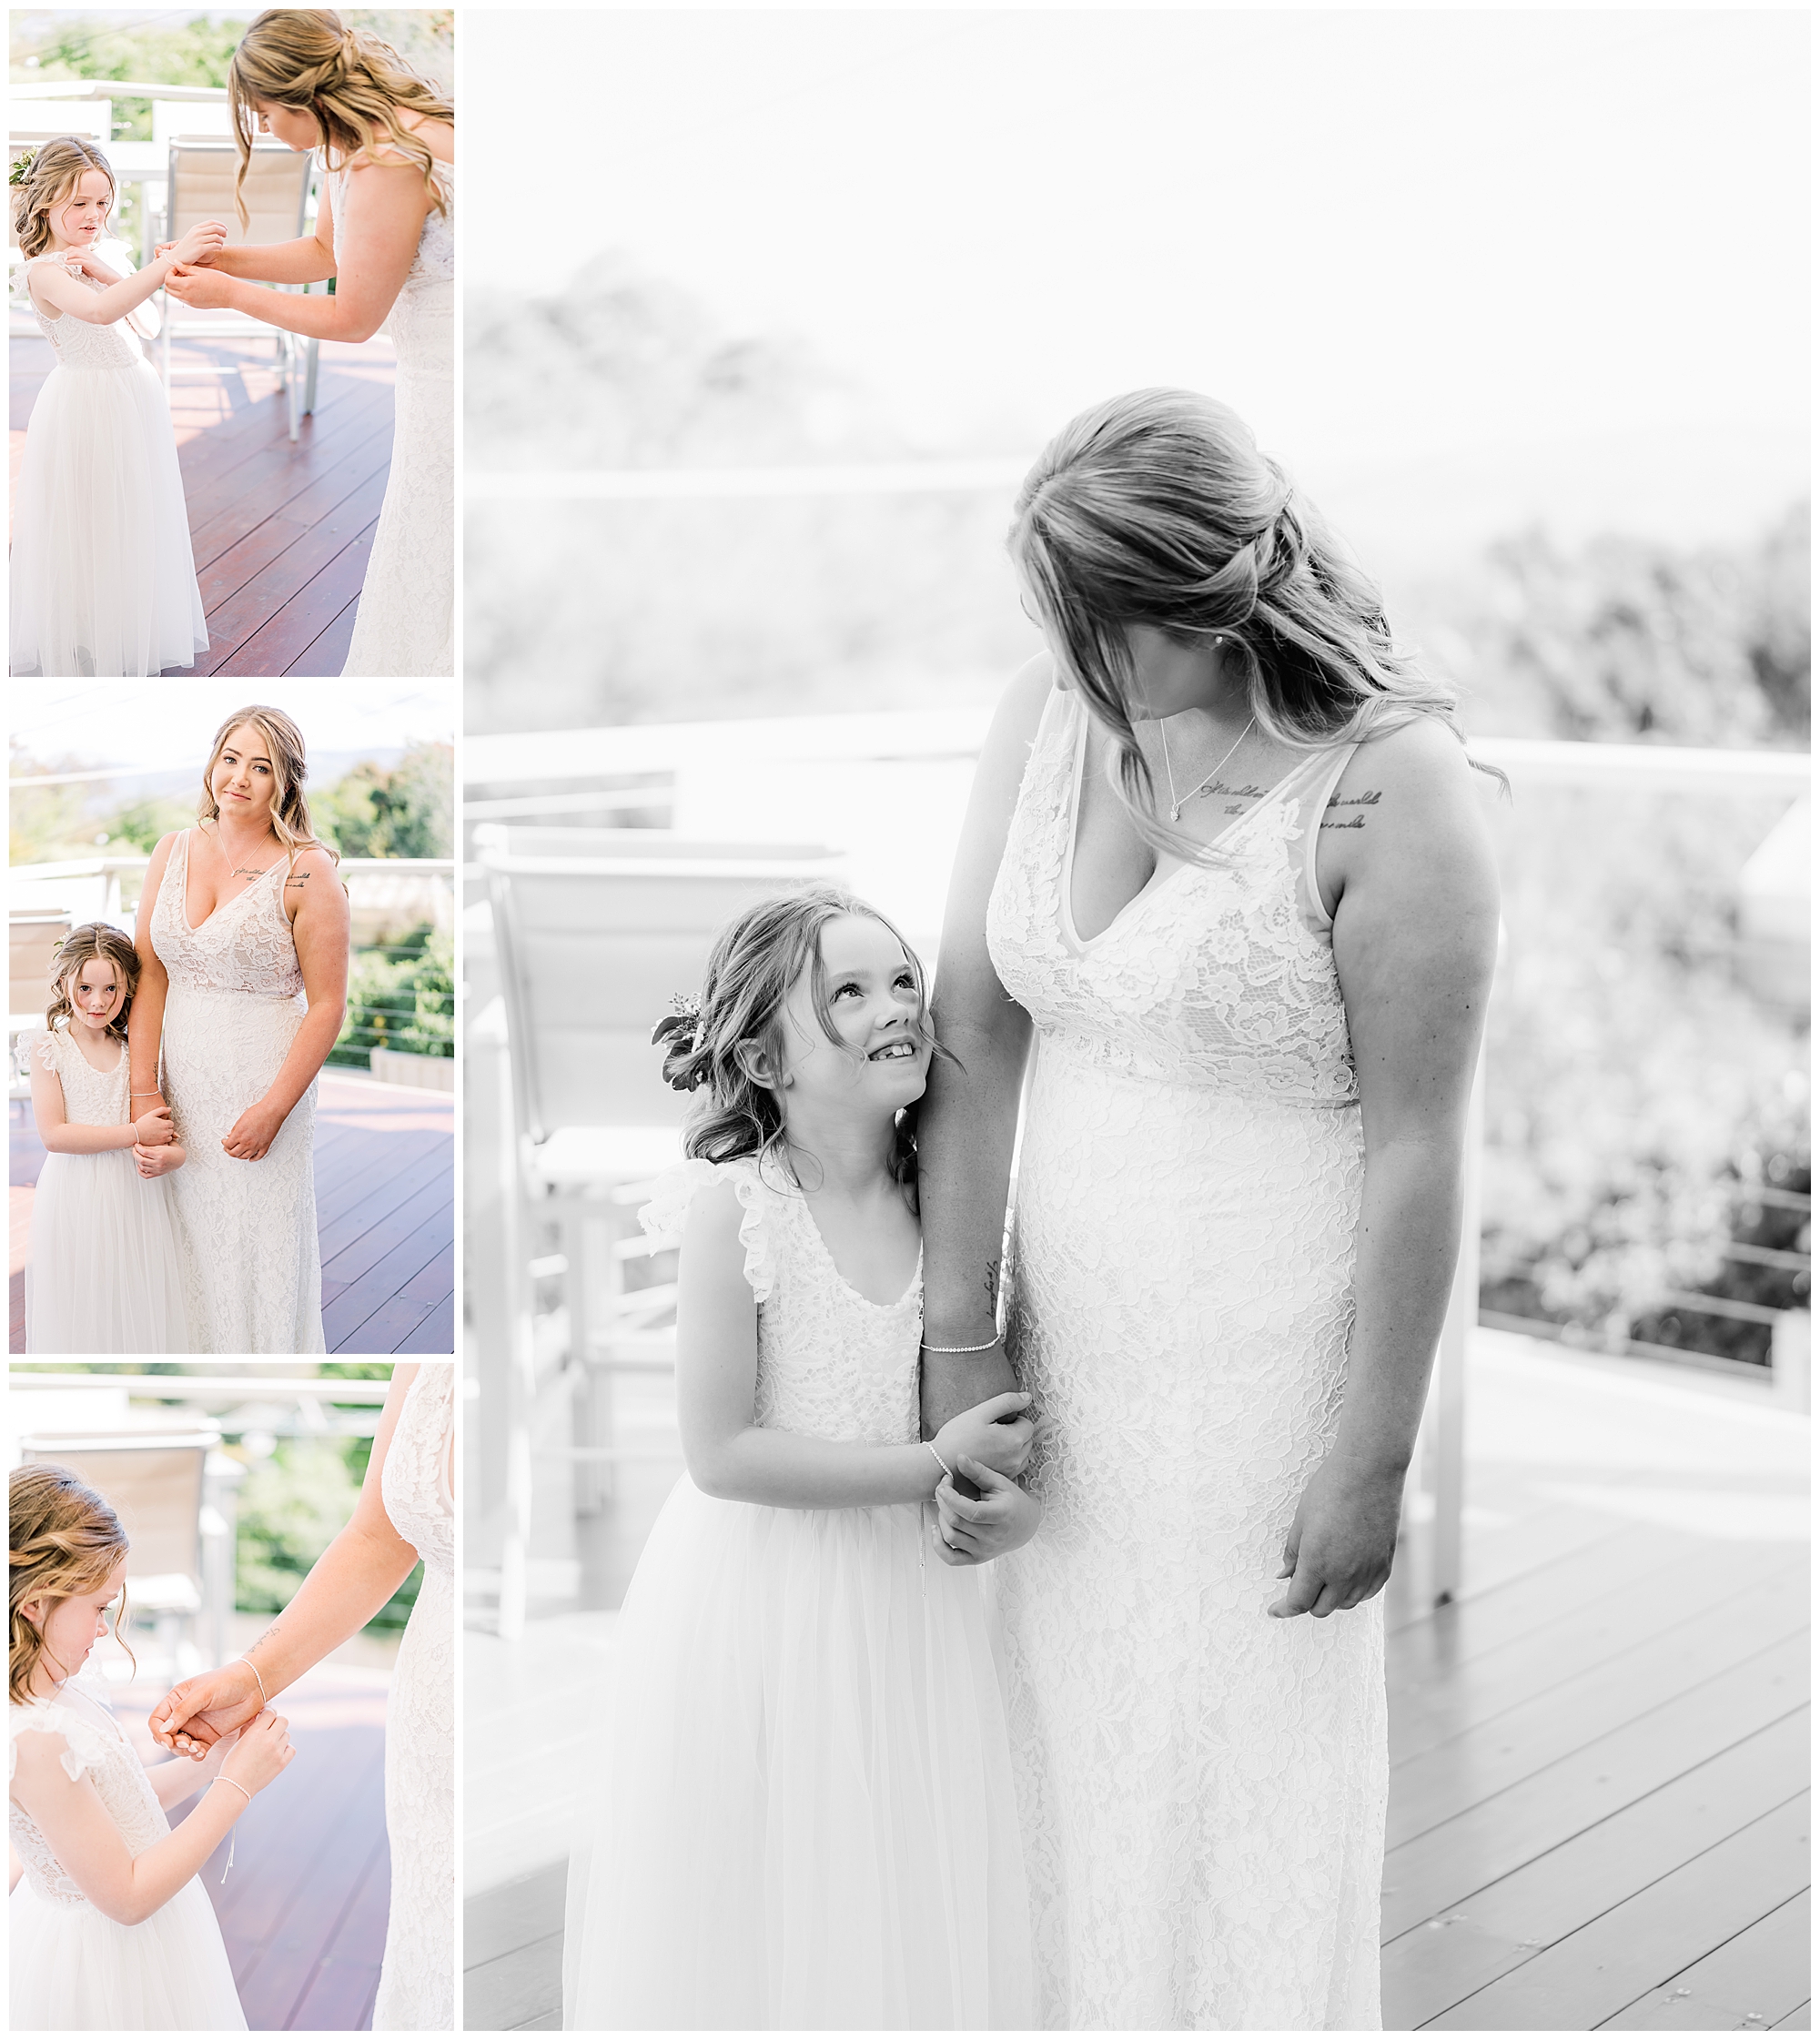 Bride standing with her daughter getting ready for her wedding